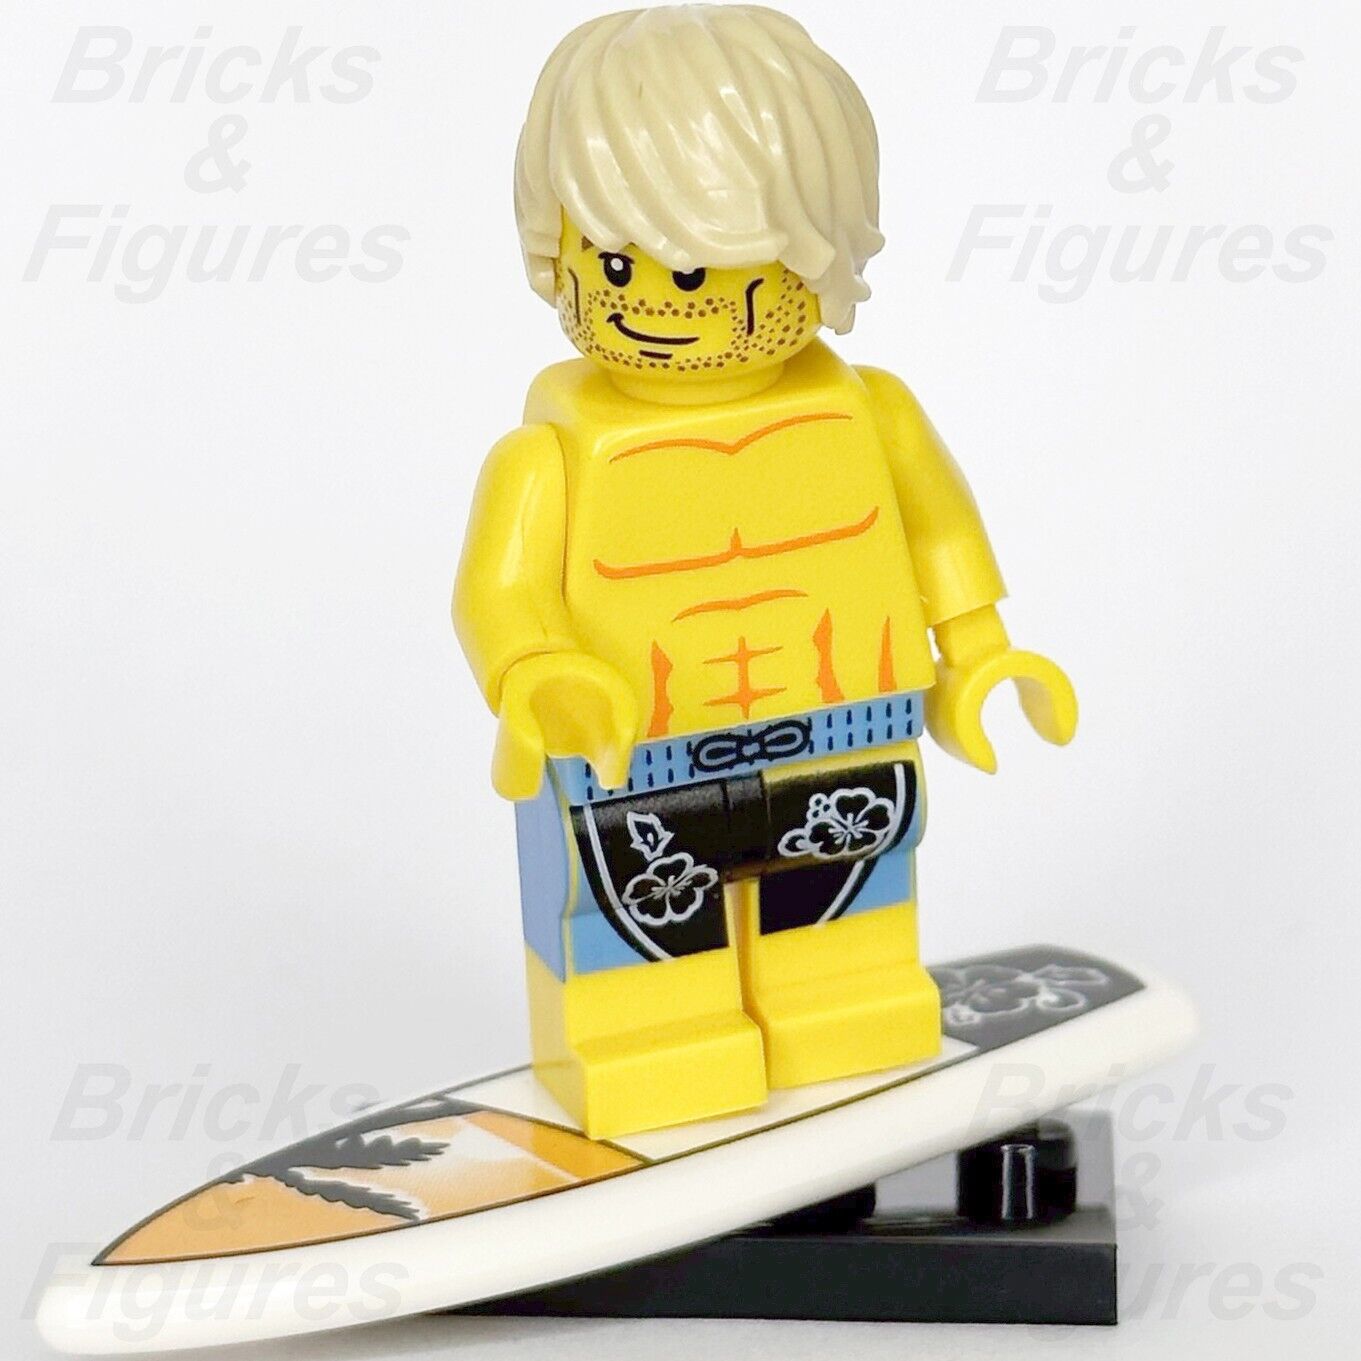 LEGO Surfer Collectible Minifigures Series 2 with Surfboard 8684 col02-15 New - Bricks & Figures